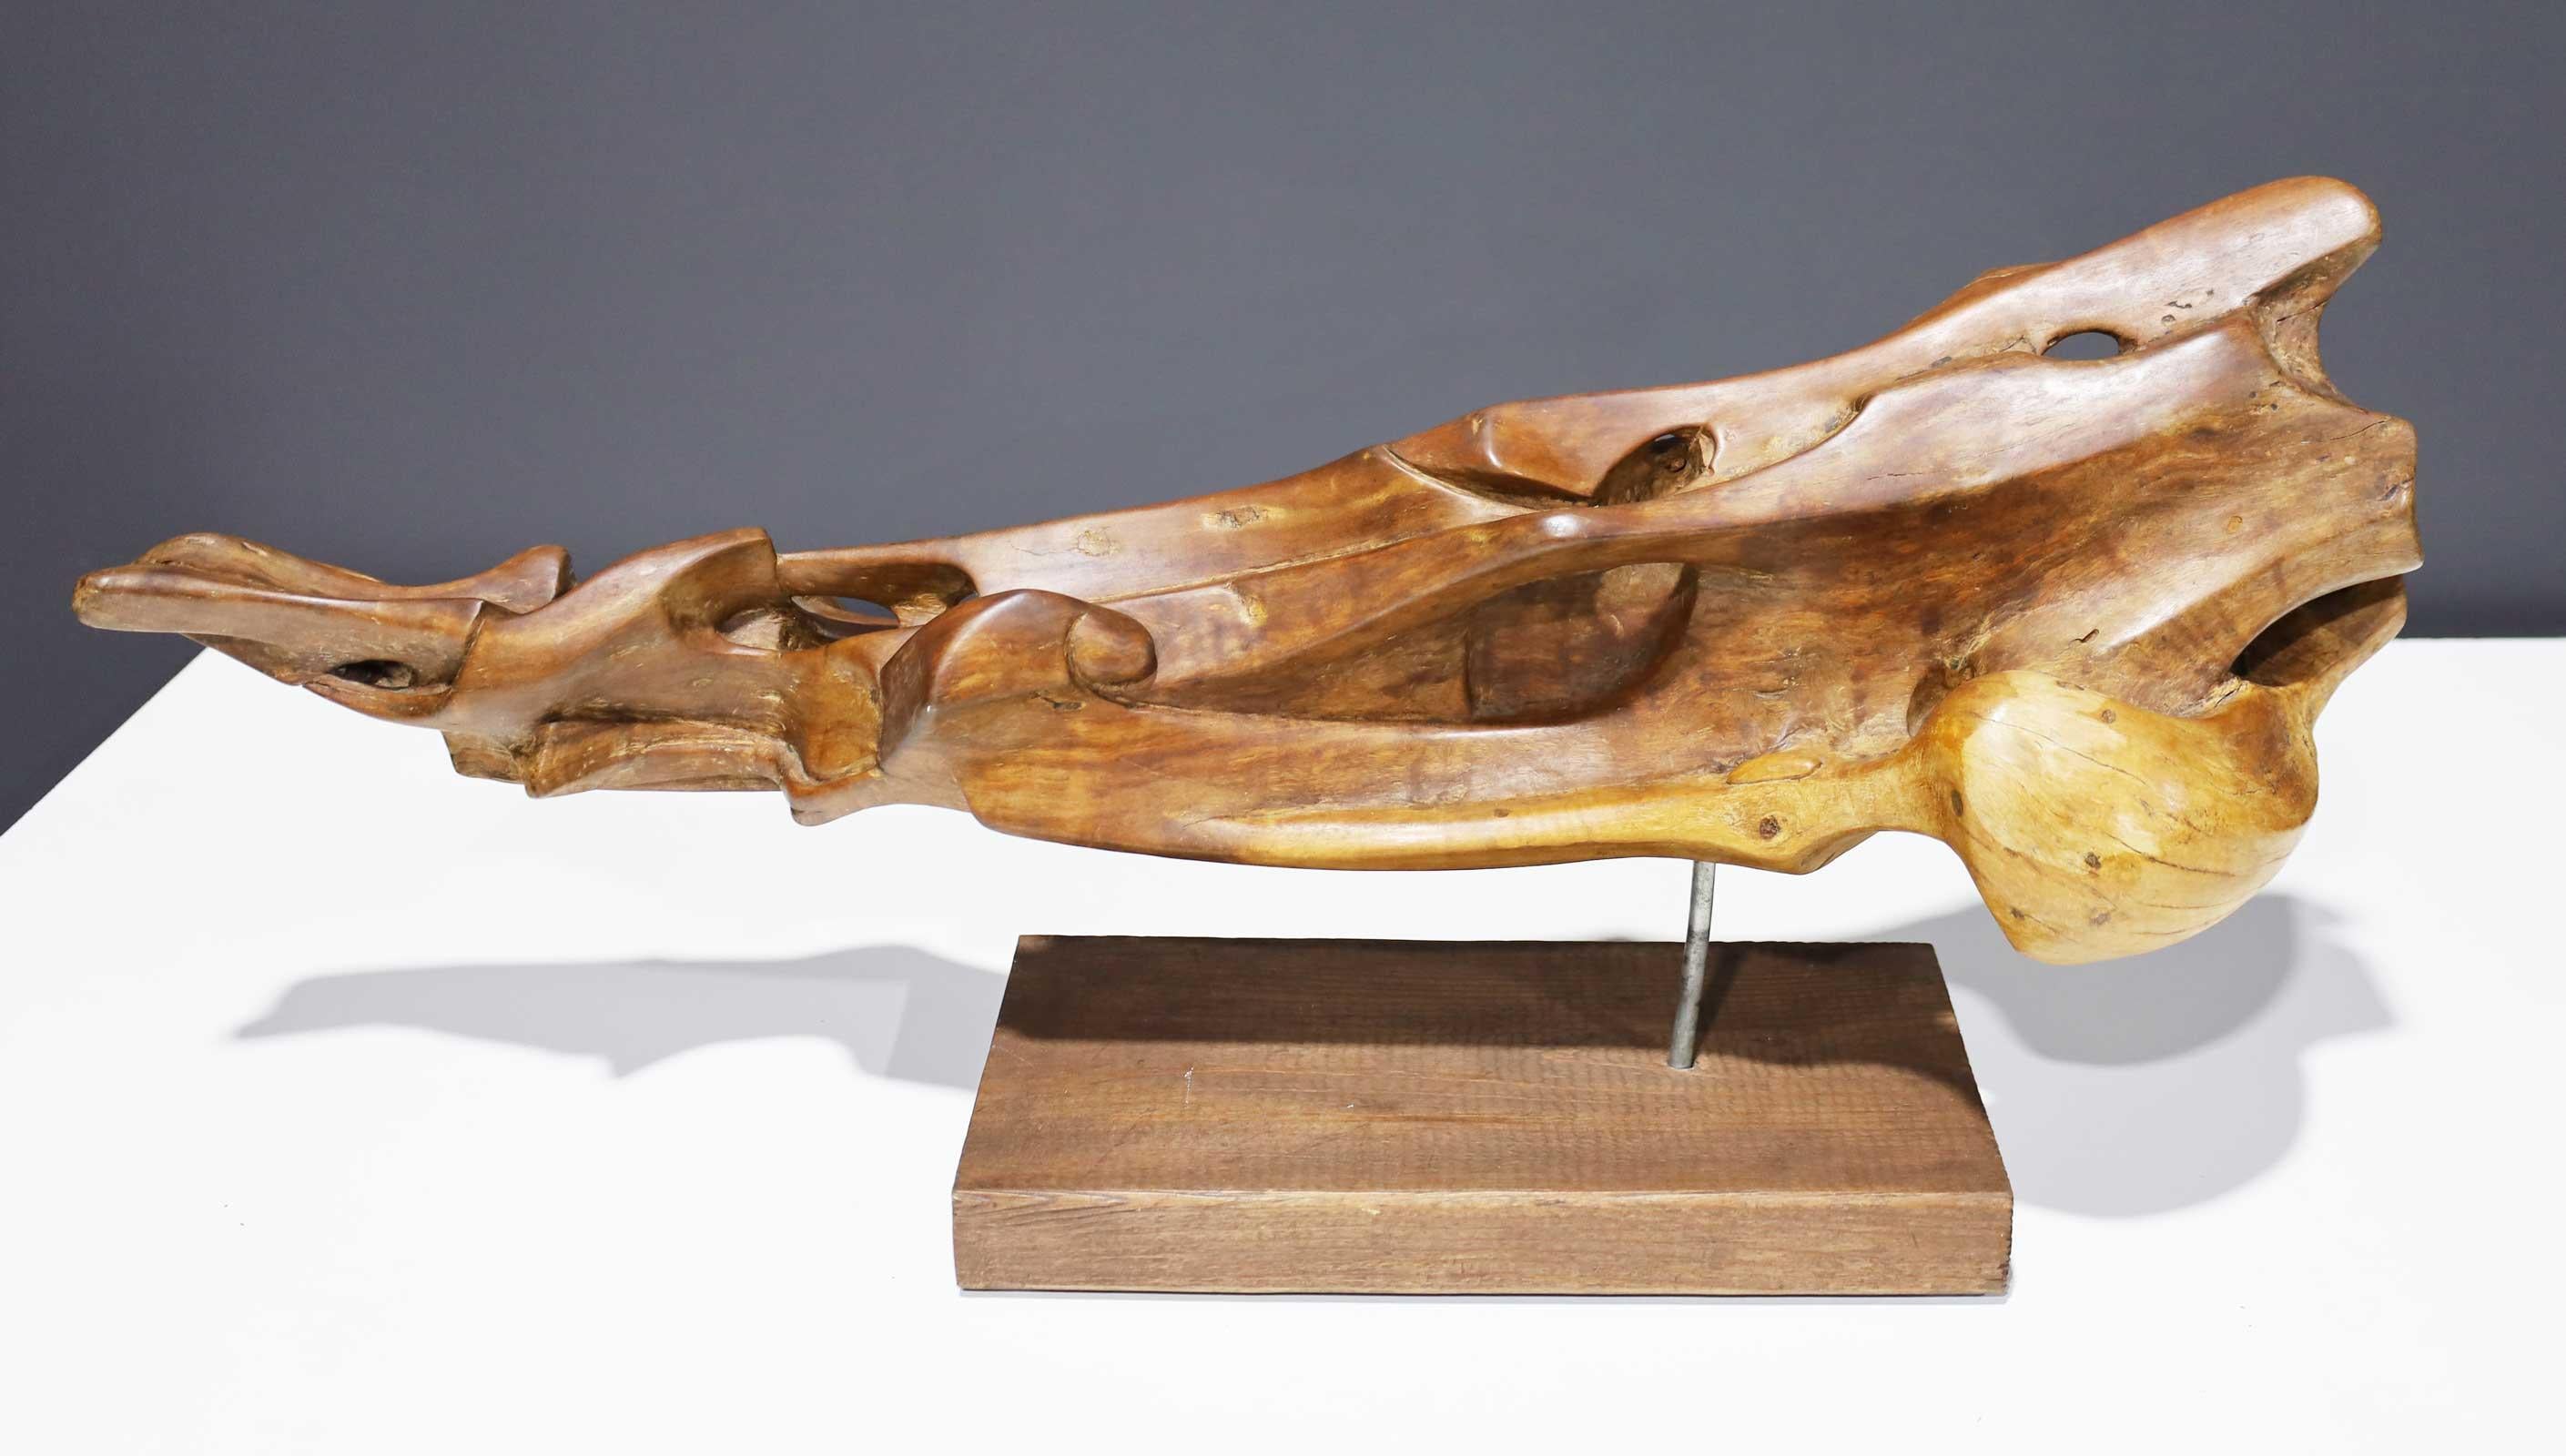 Beautiful organic wood sculpture mounted on a wooden base. Sculpture is signed Huez Dominguez.